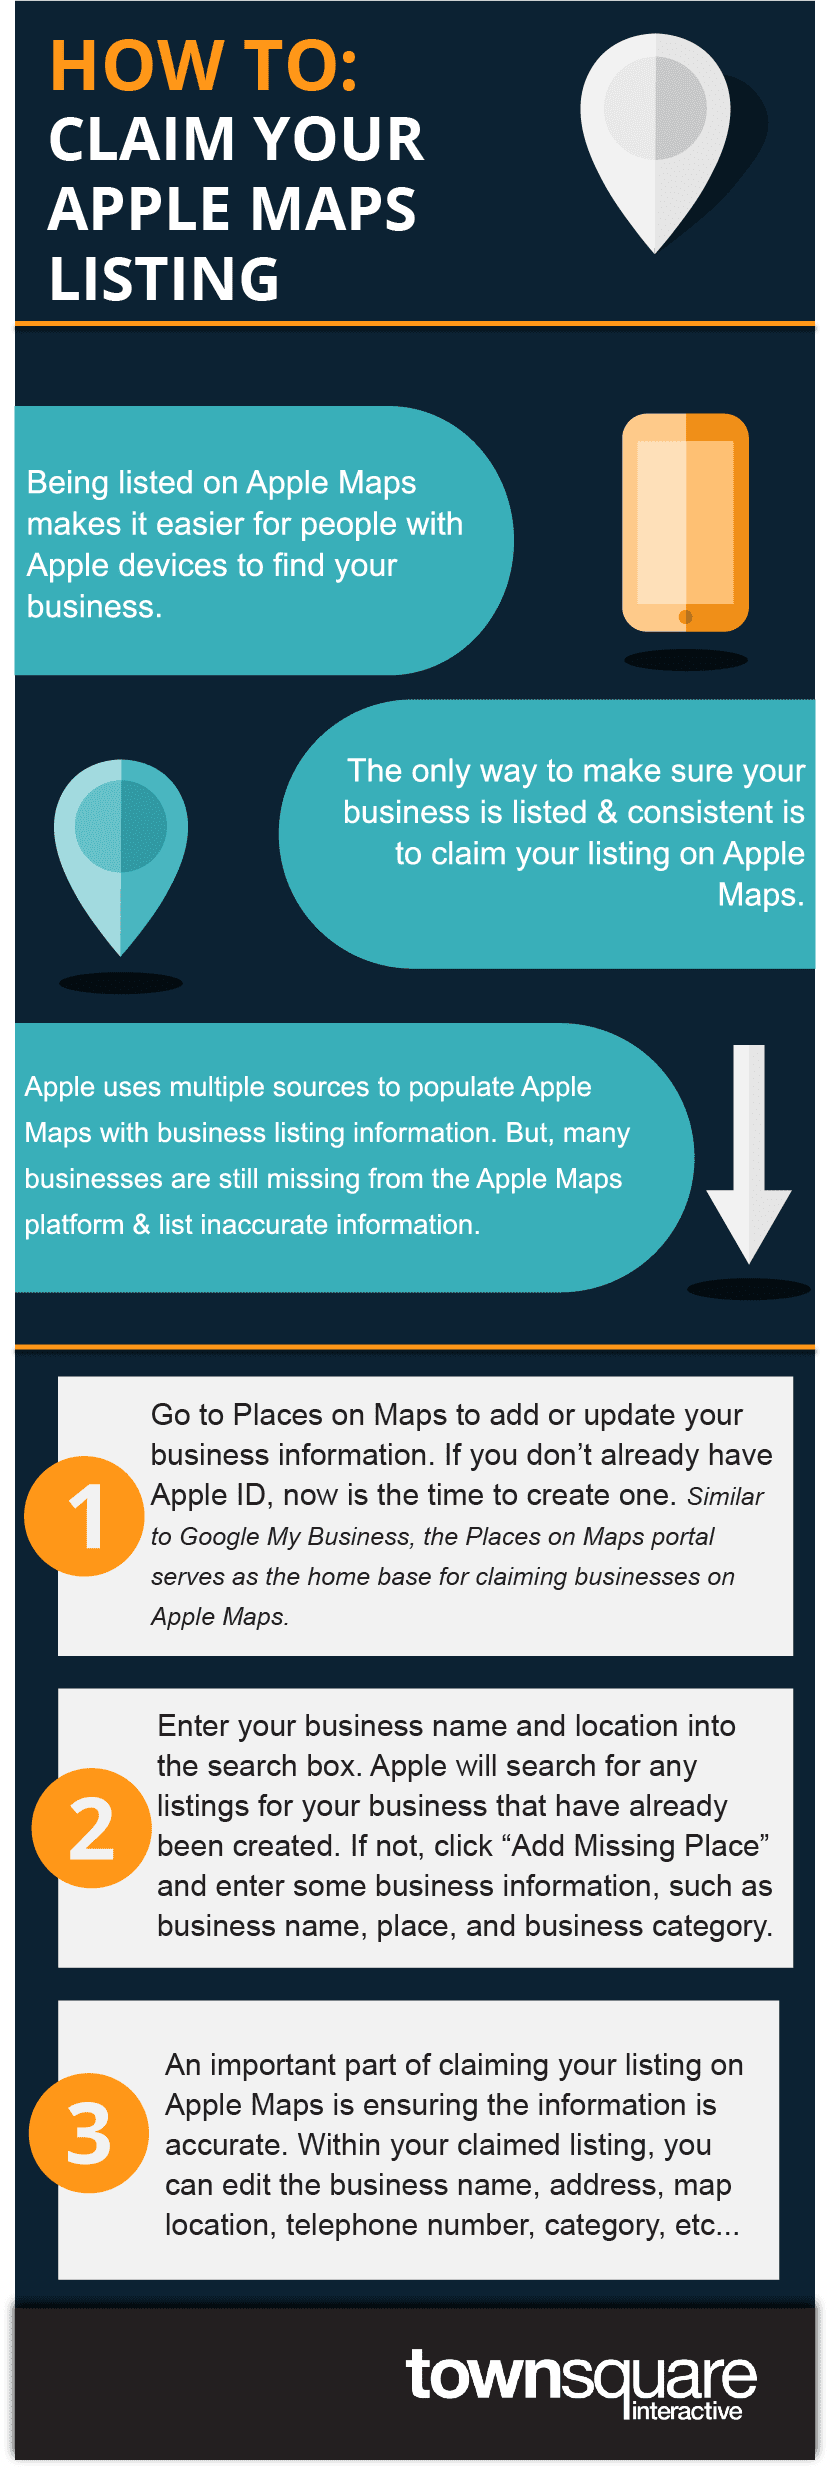 How To Claimed Your Apple Maps Listing Infographic